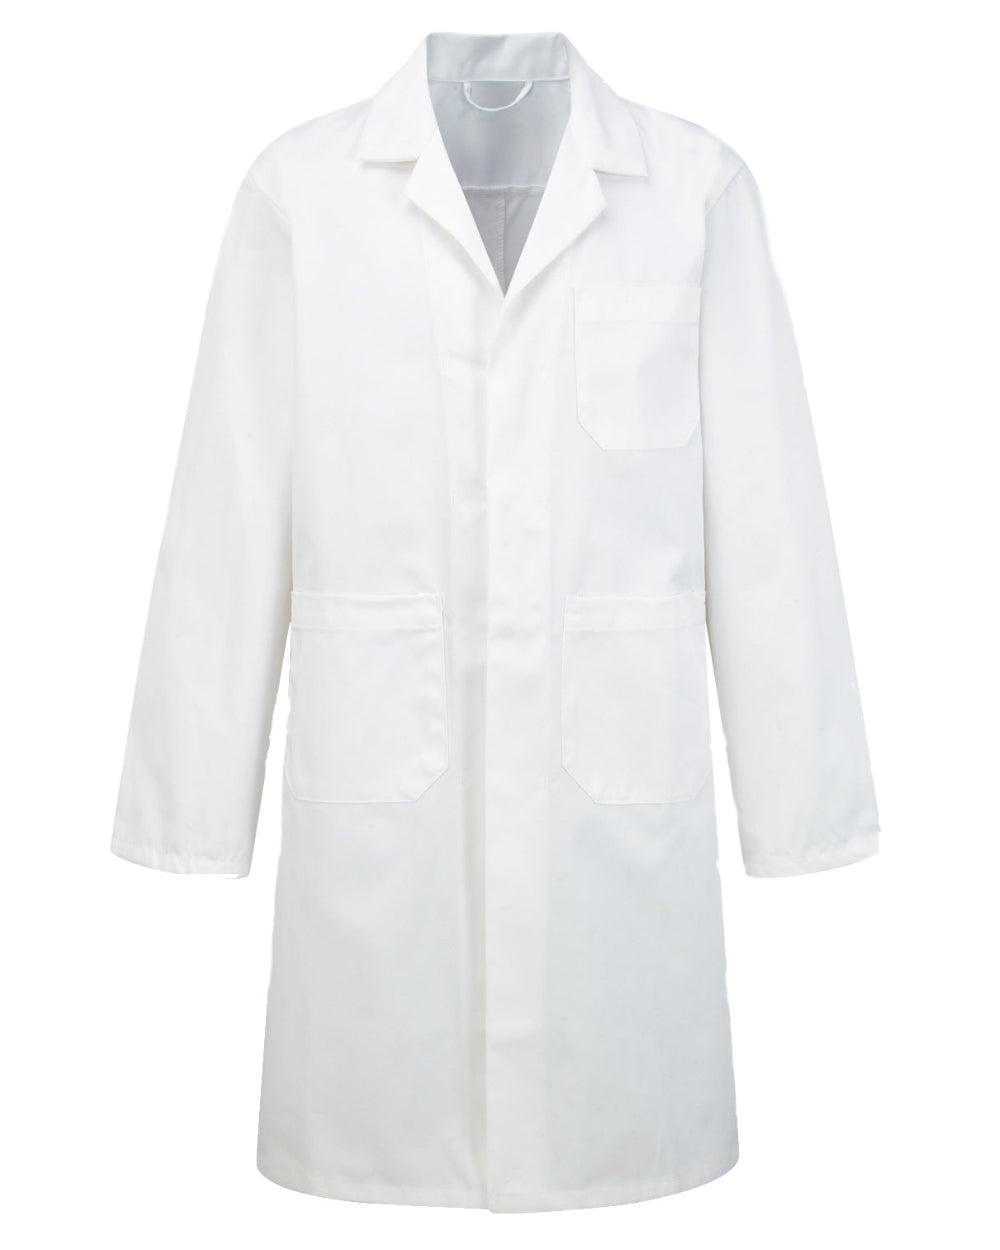 White Coloured Fort Childrens Warehouse Coat On A White Background